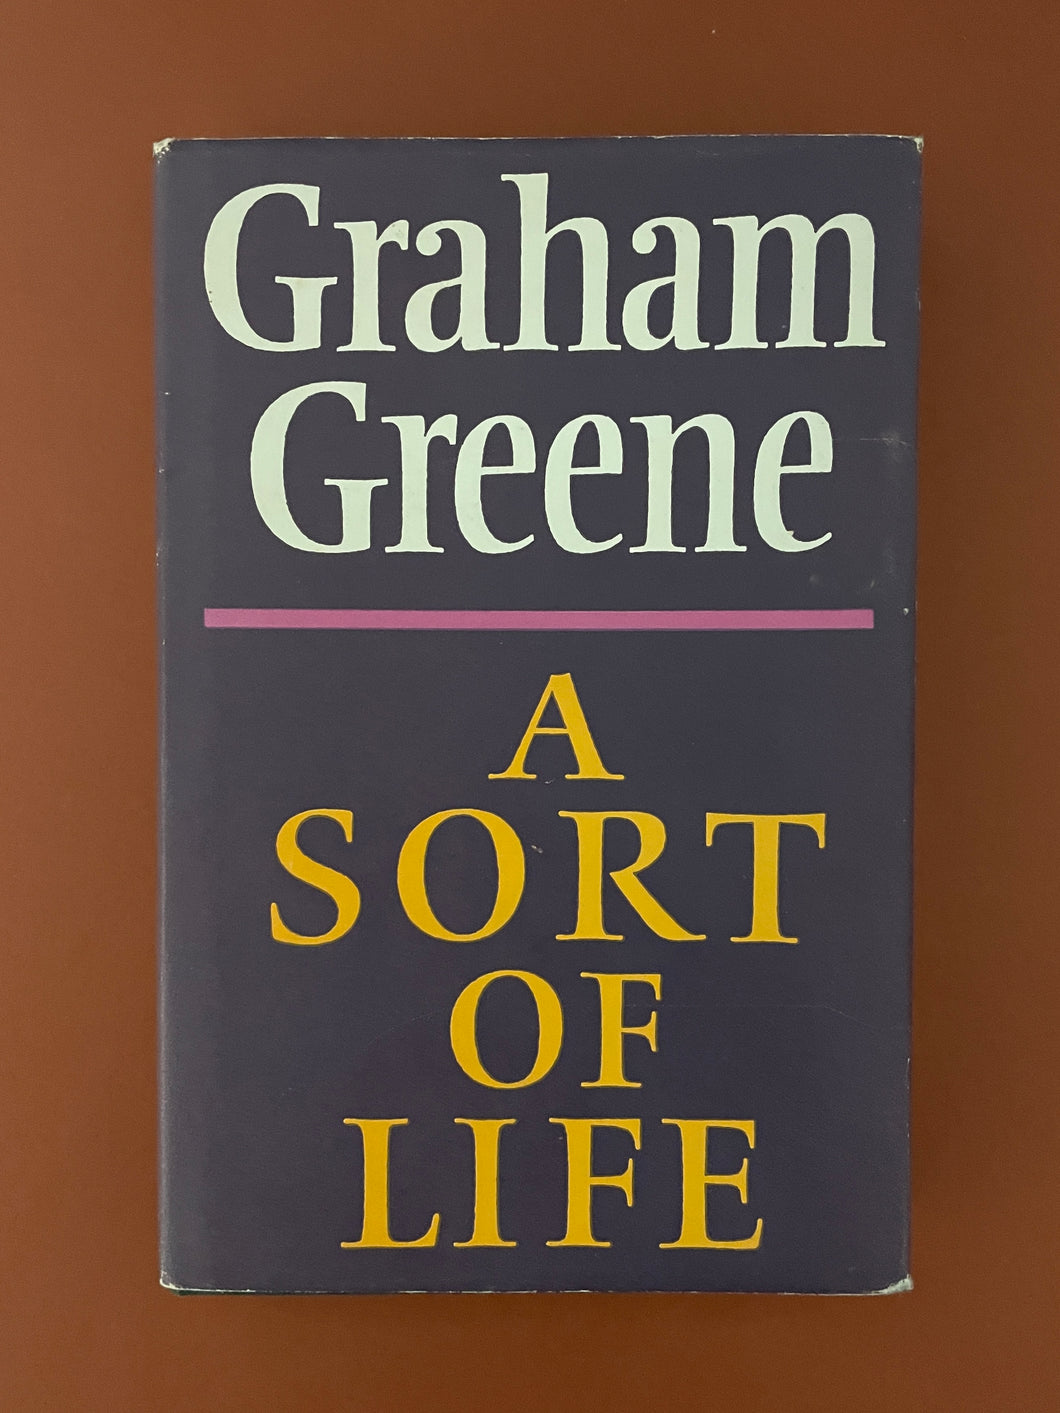 A Sort of Life by Graham Greene: photo of the front cover which shows minor scuff marks along the edges of the dust jacket.